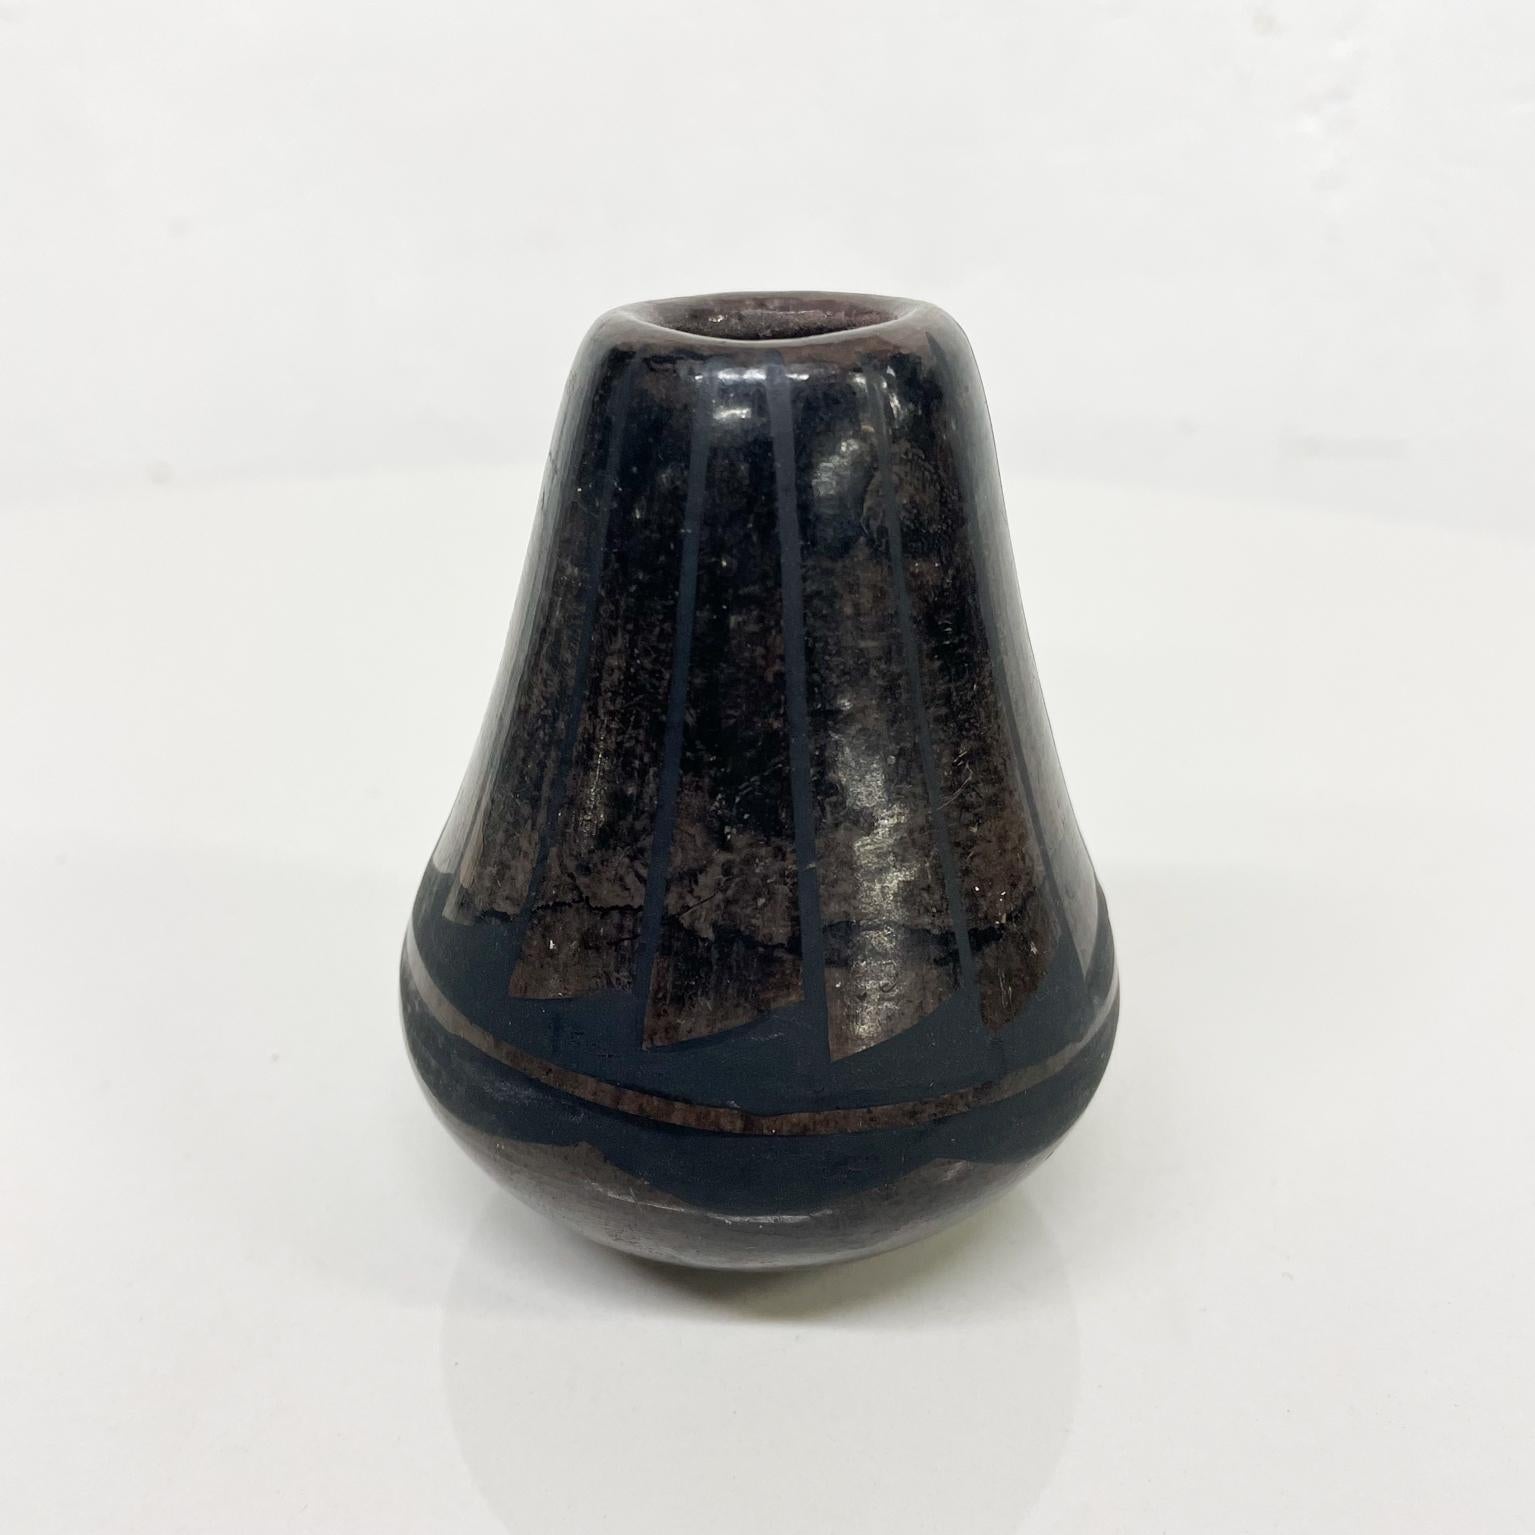 Weed Pot
Midcentury Modern Black and Brown Pottery Small Weed Pot Vase 1970s Art
Barro Negro Black Pottery fabulous modern linear graphic New Mexico
2.75 diameter x 3.25 H inches
Signed JM SDP attributed to Santa Clara Pueblo New Mexico
Unrestored